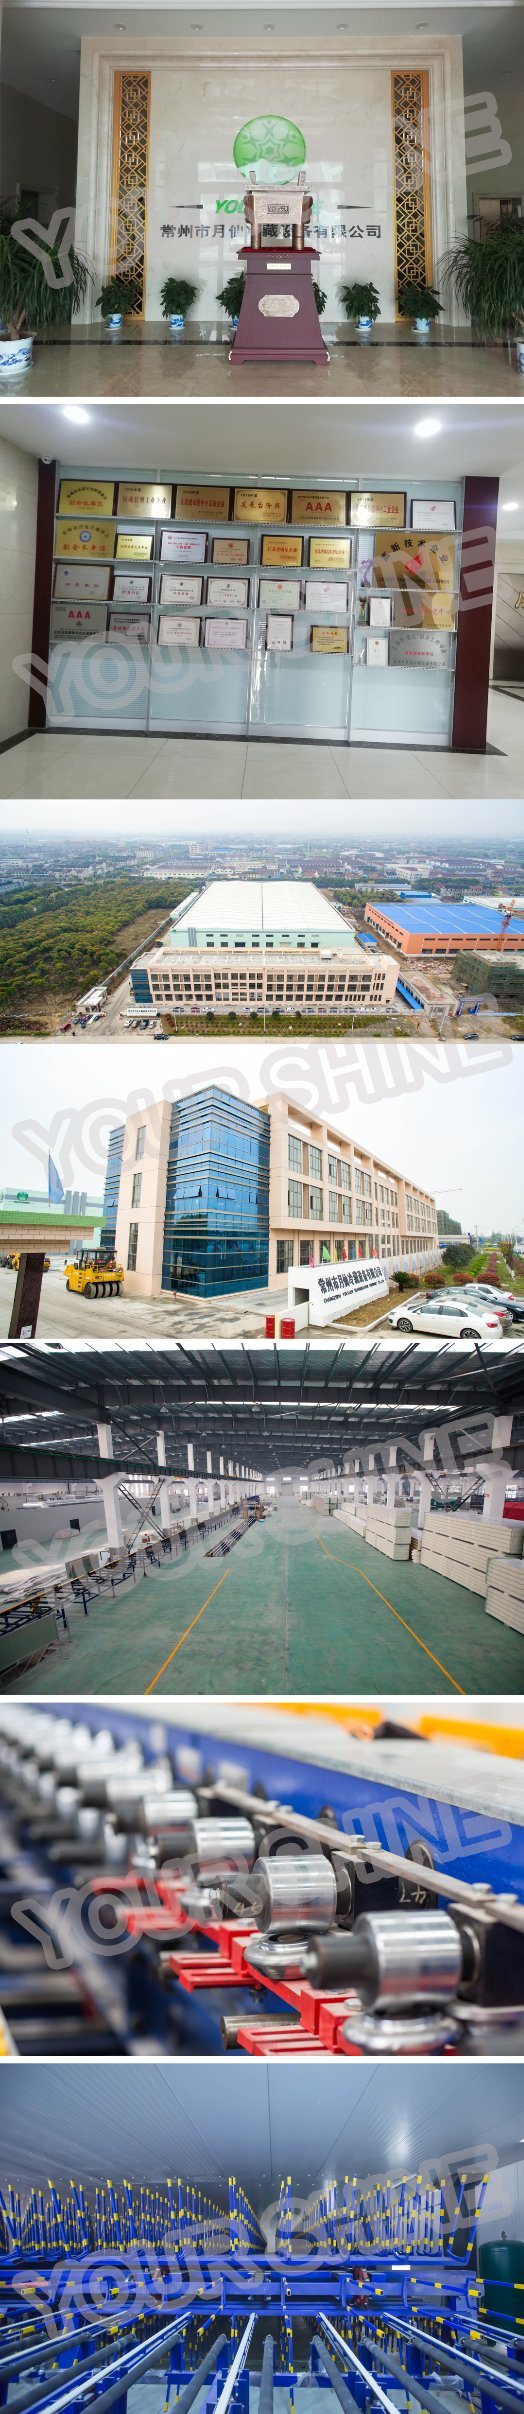 Polyurethanes Sandwich Panel/PU Sandwich Panel for Wall and Roof